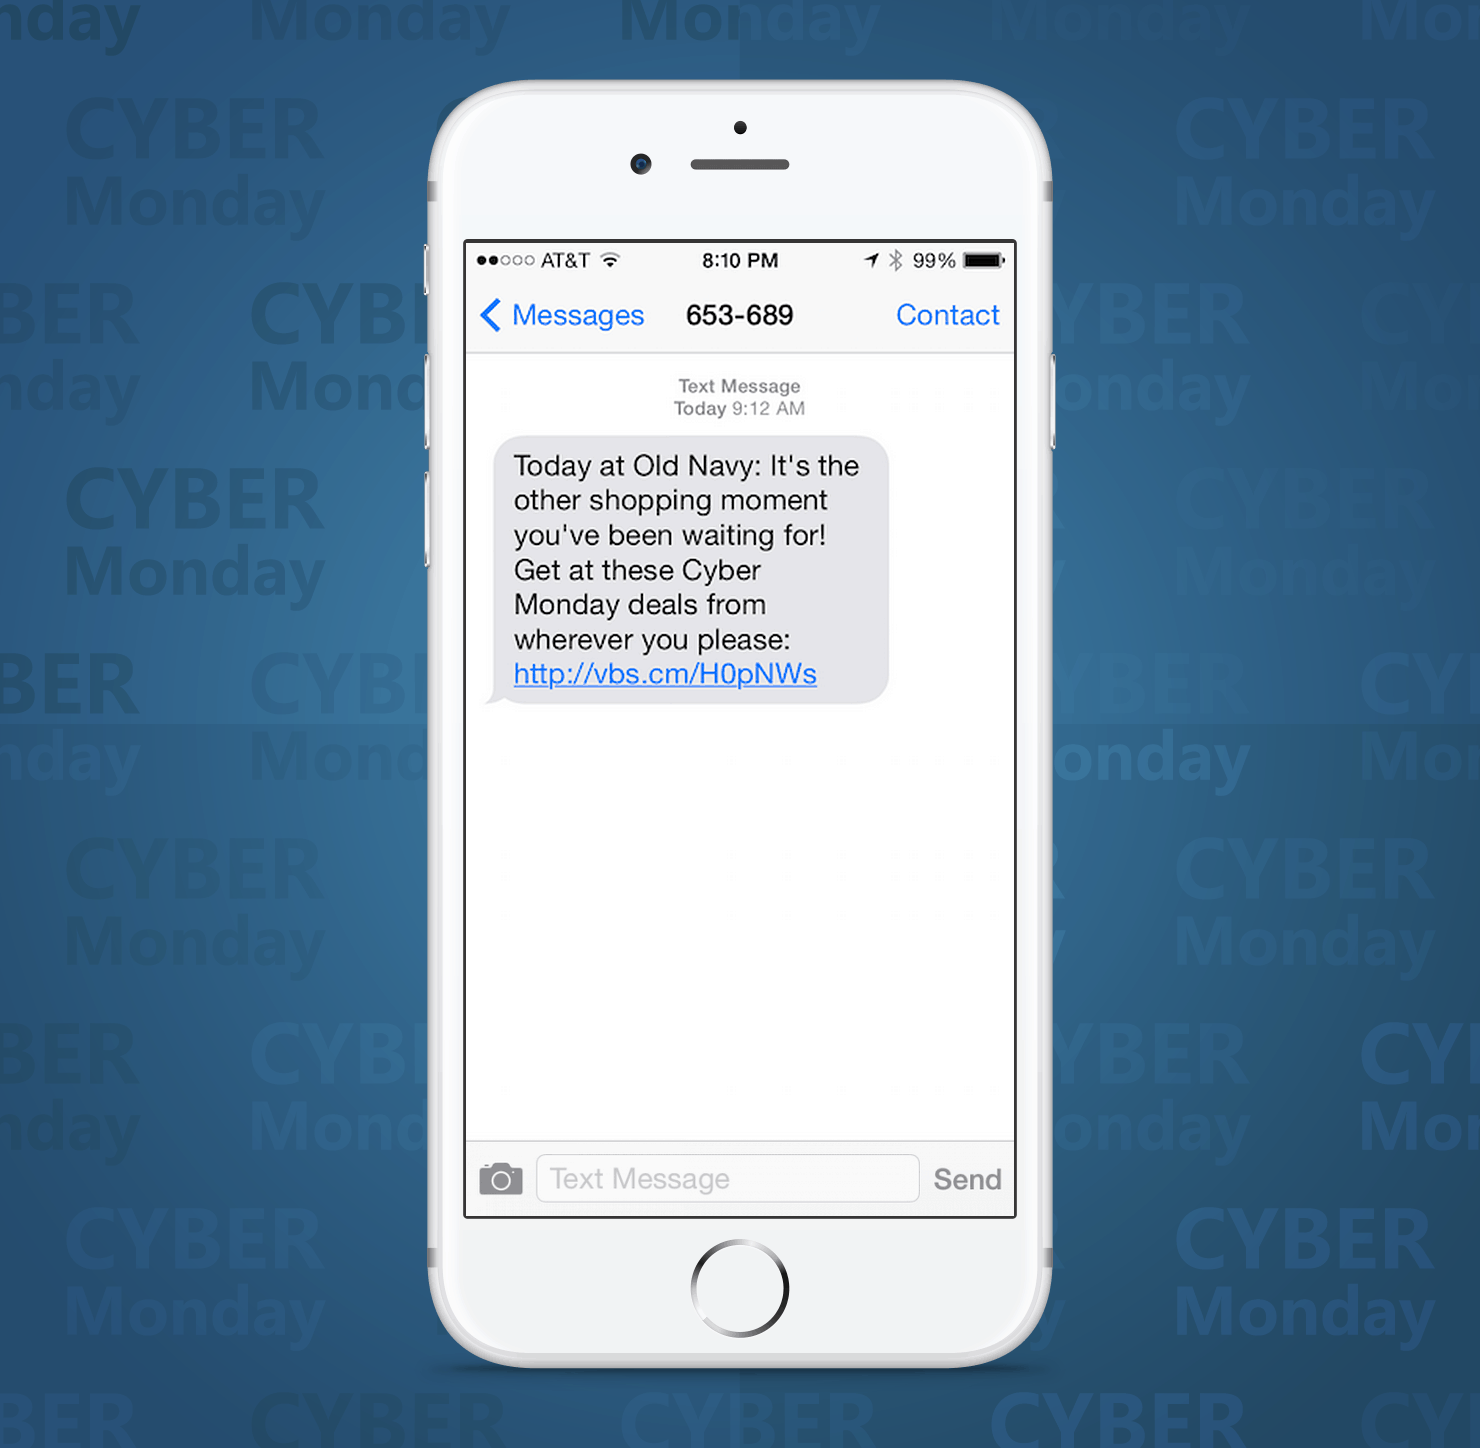 SMS Coupon Example Sent on Cyber Monday From Old Navy Retail Stores to Customers